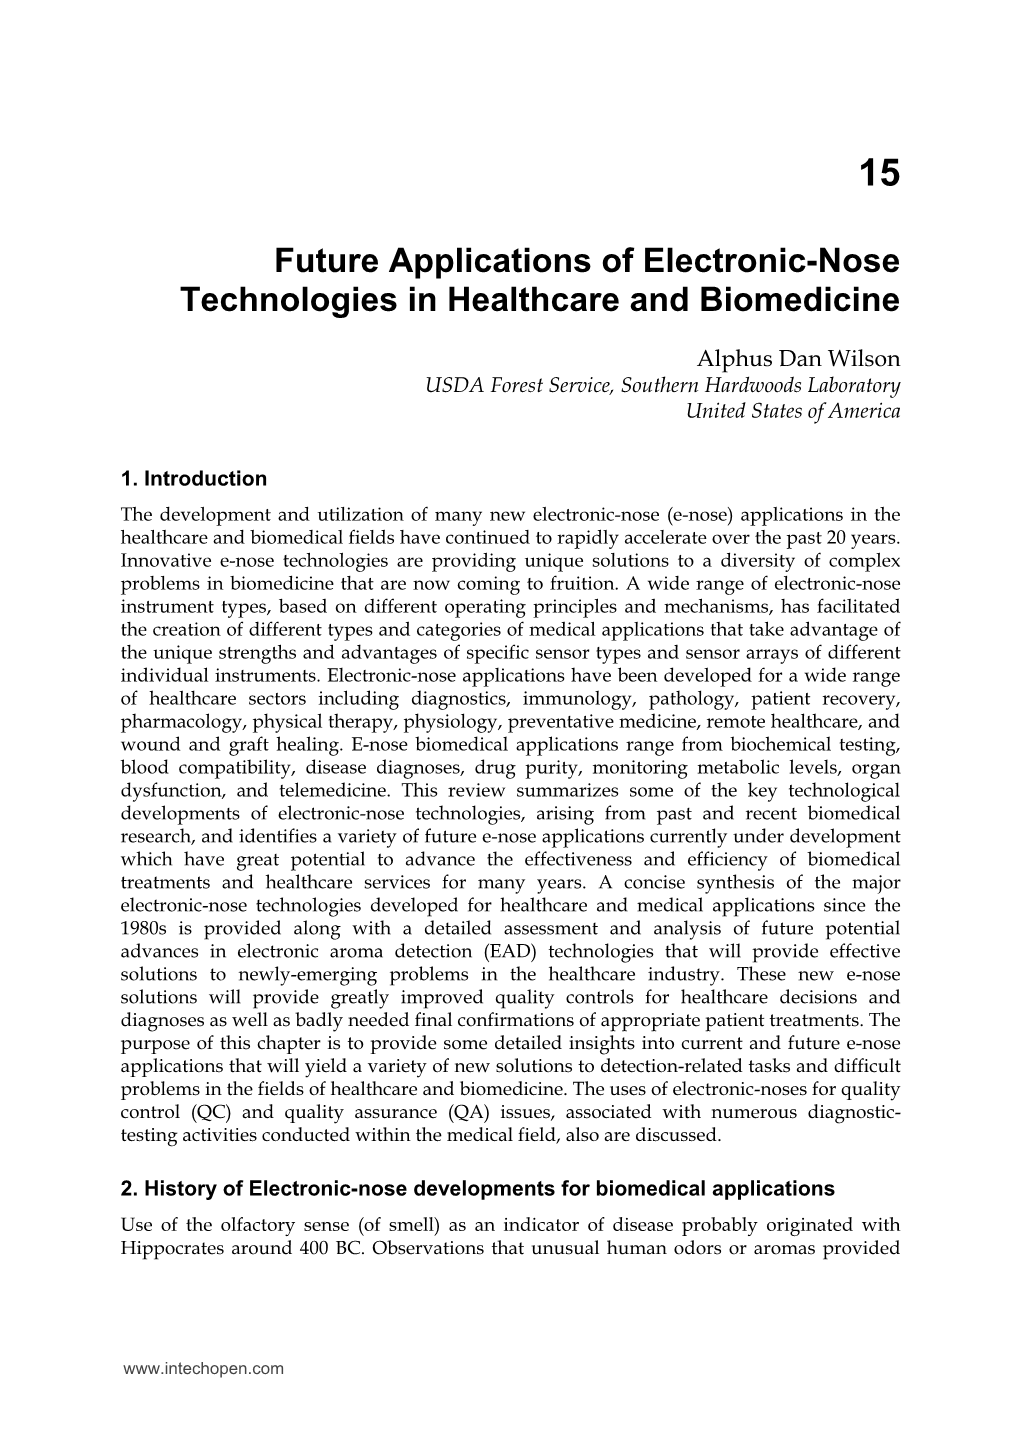 Future Applications of Electronic-Nose Technologies in Healthcare and Biomedicine